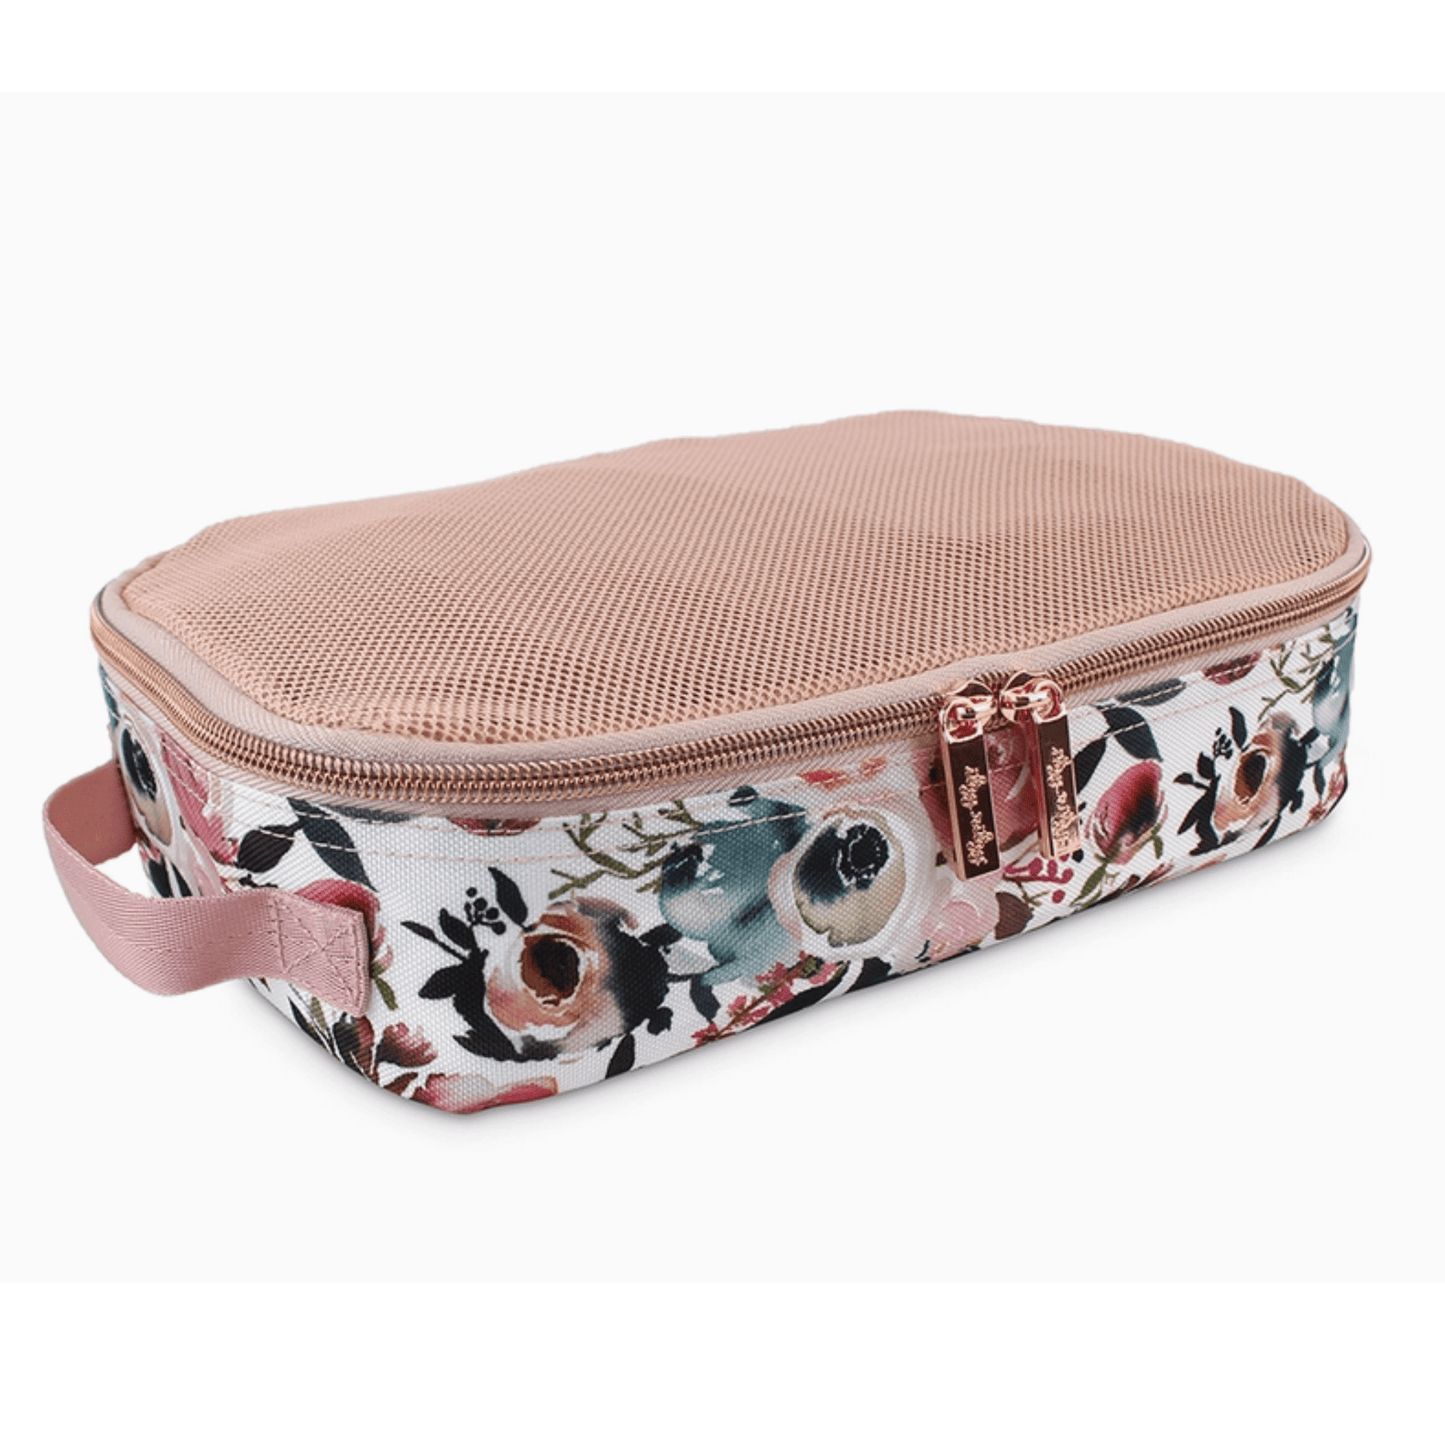 Itzy Ritzy Floral Pack Like A Boss Packing Cubes & Travel Toiletries Bag